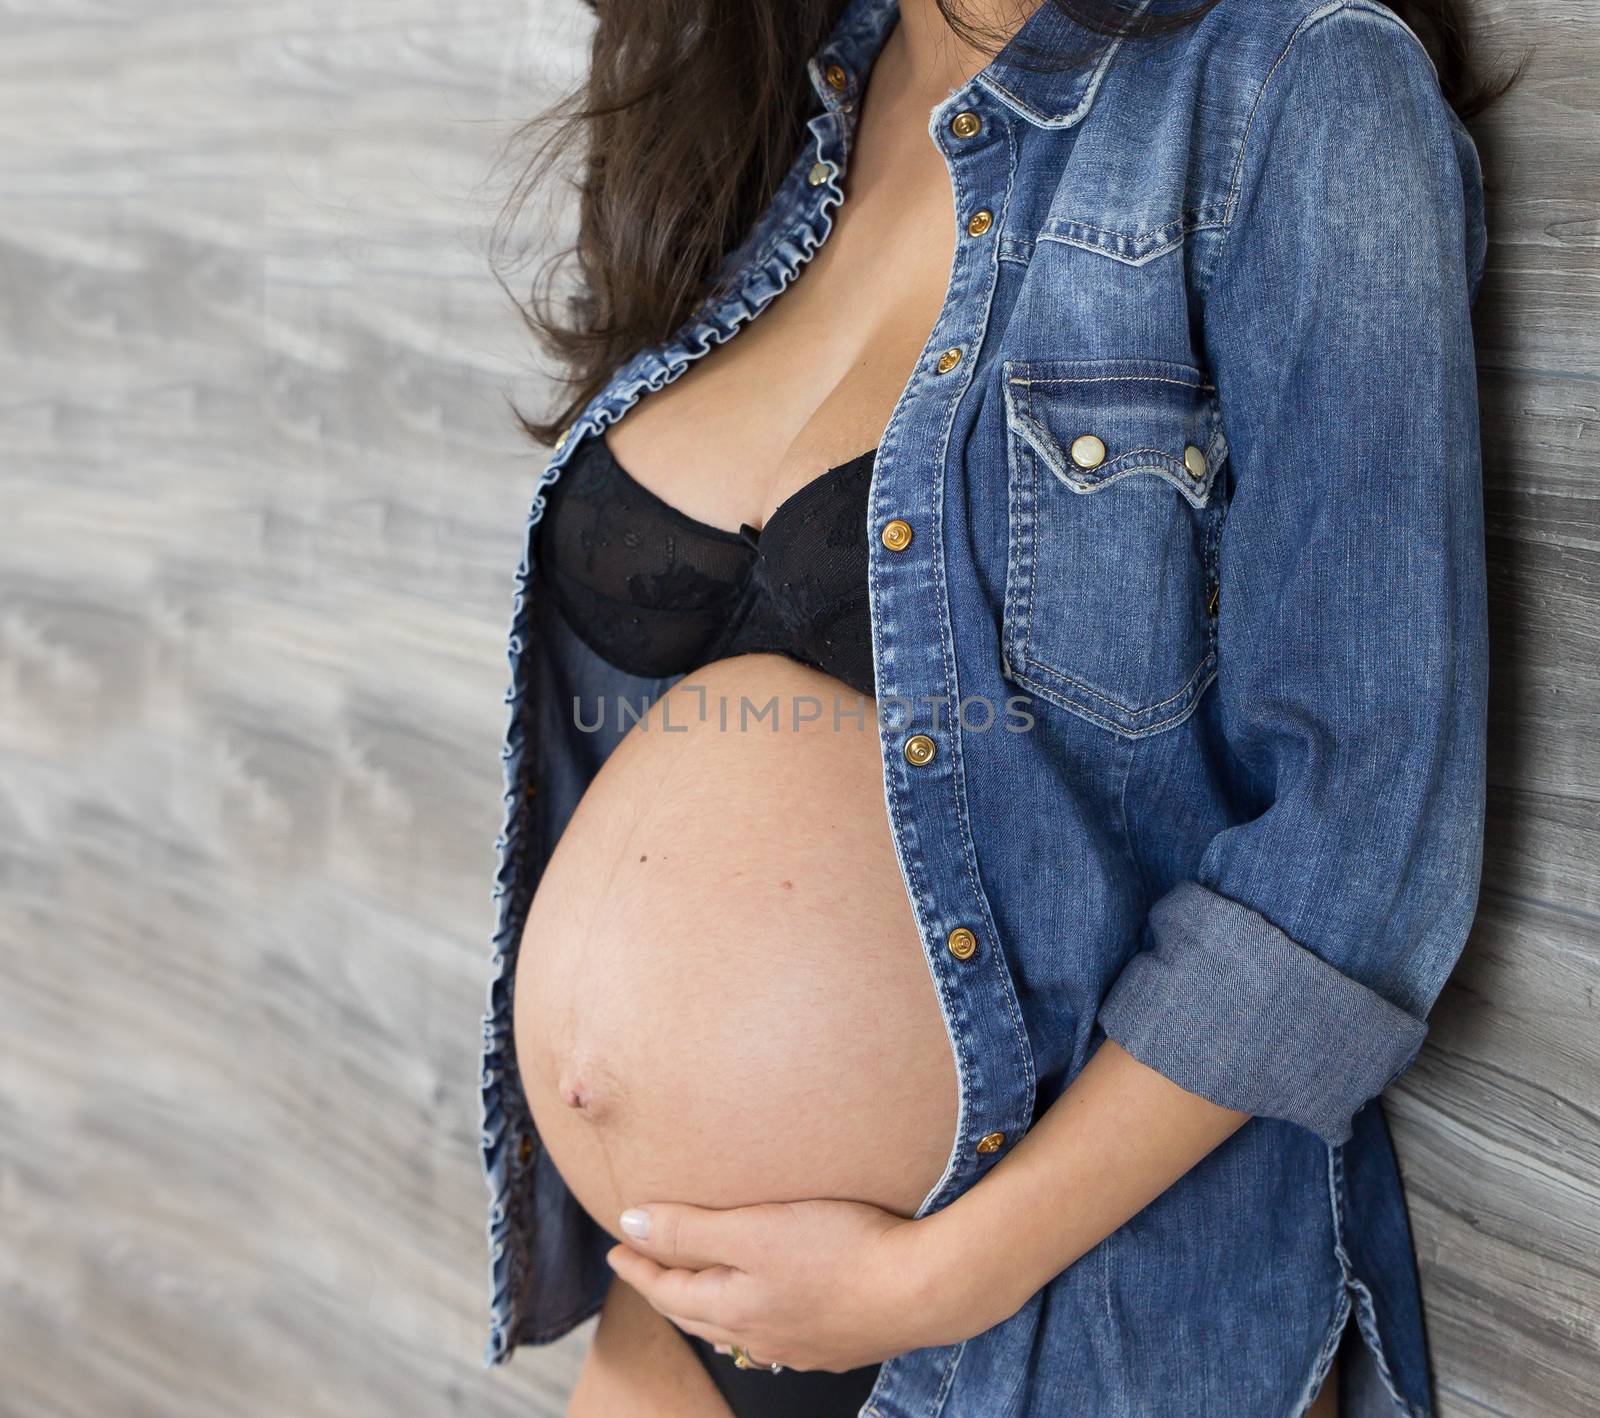 The sweet expectation of a pregnant with a denim shirt.